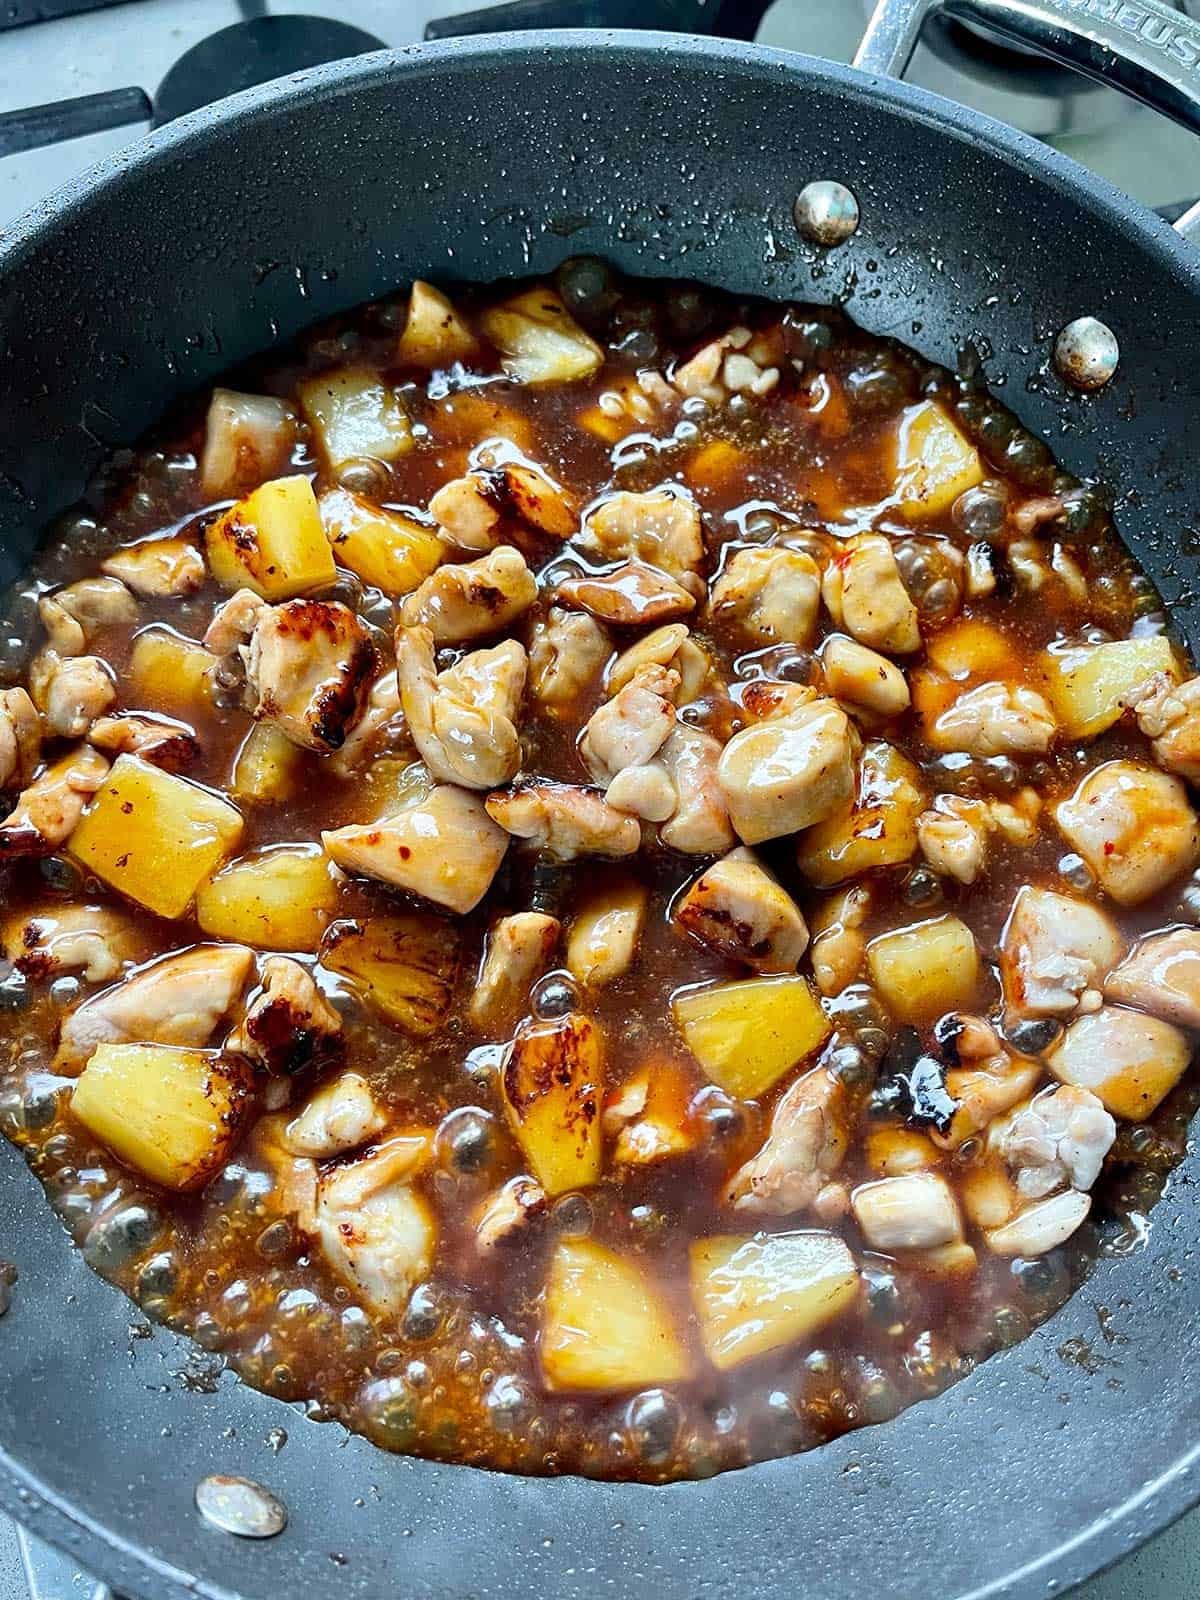 Pineapple and pork simmering in a pan